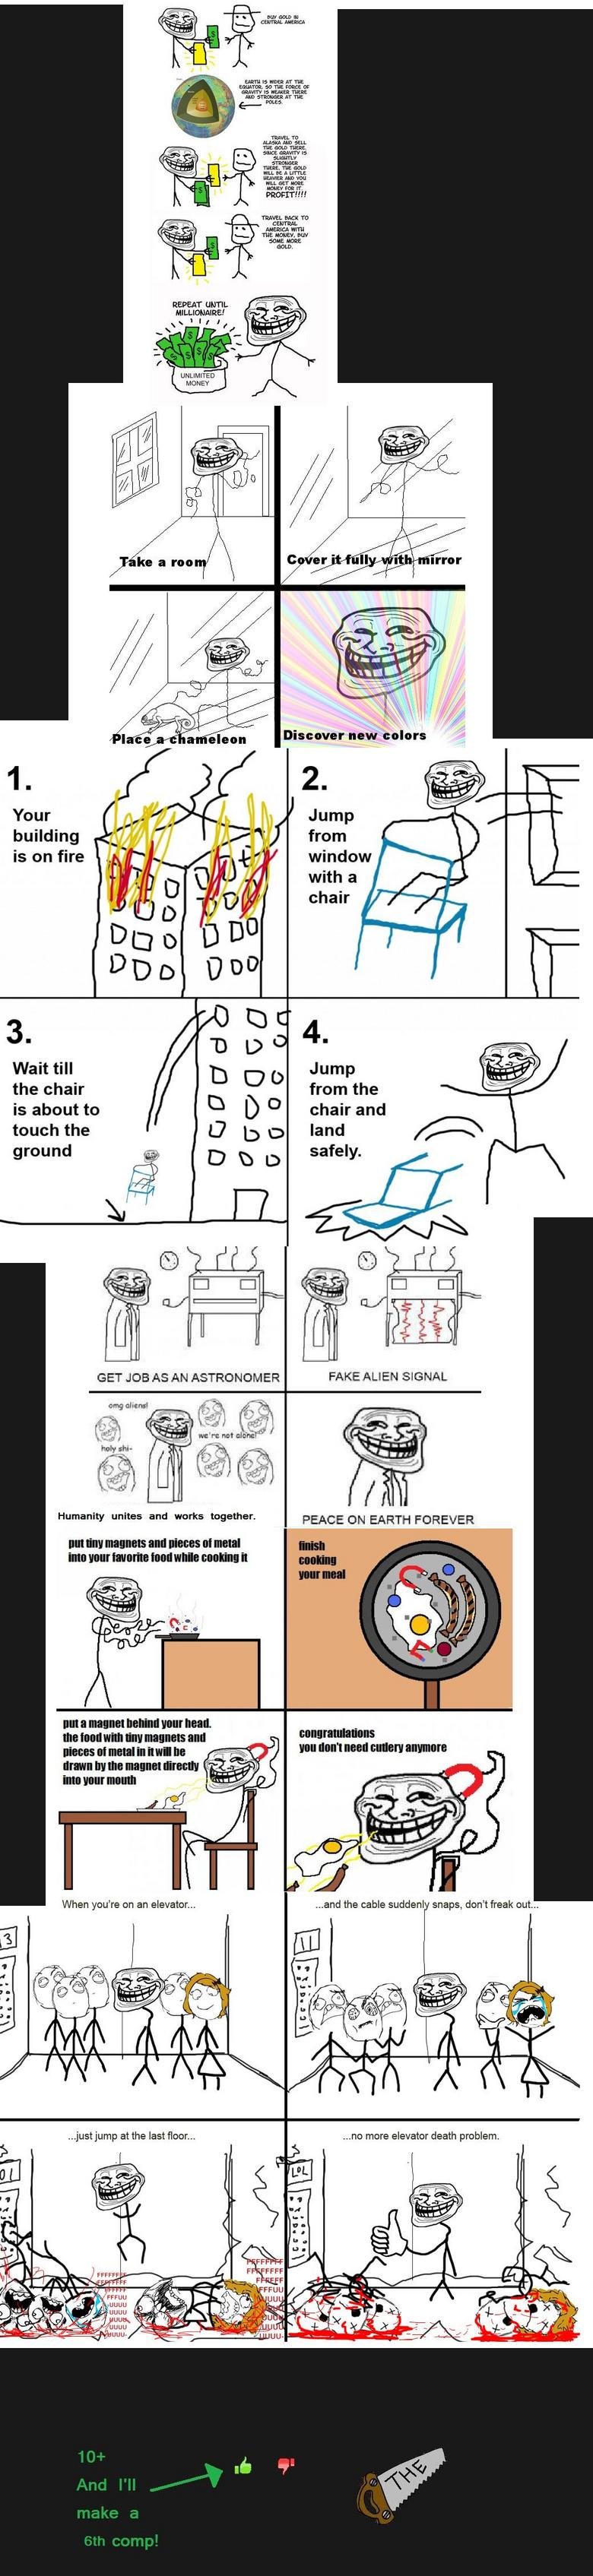 Troll Science comp 5.. &lt;a href=&quot;pictures/1742969/Troll+Science+comp/&quot; target=blank&gt;www.funnyjunk.com/funnypictures/1742969/Troll+Science+comp/&l